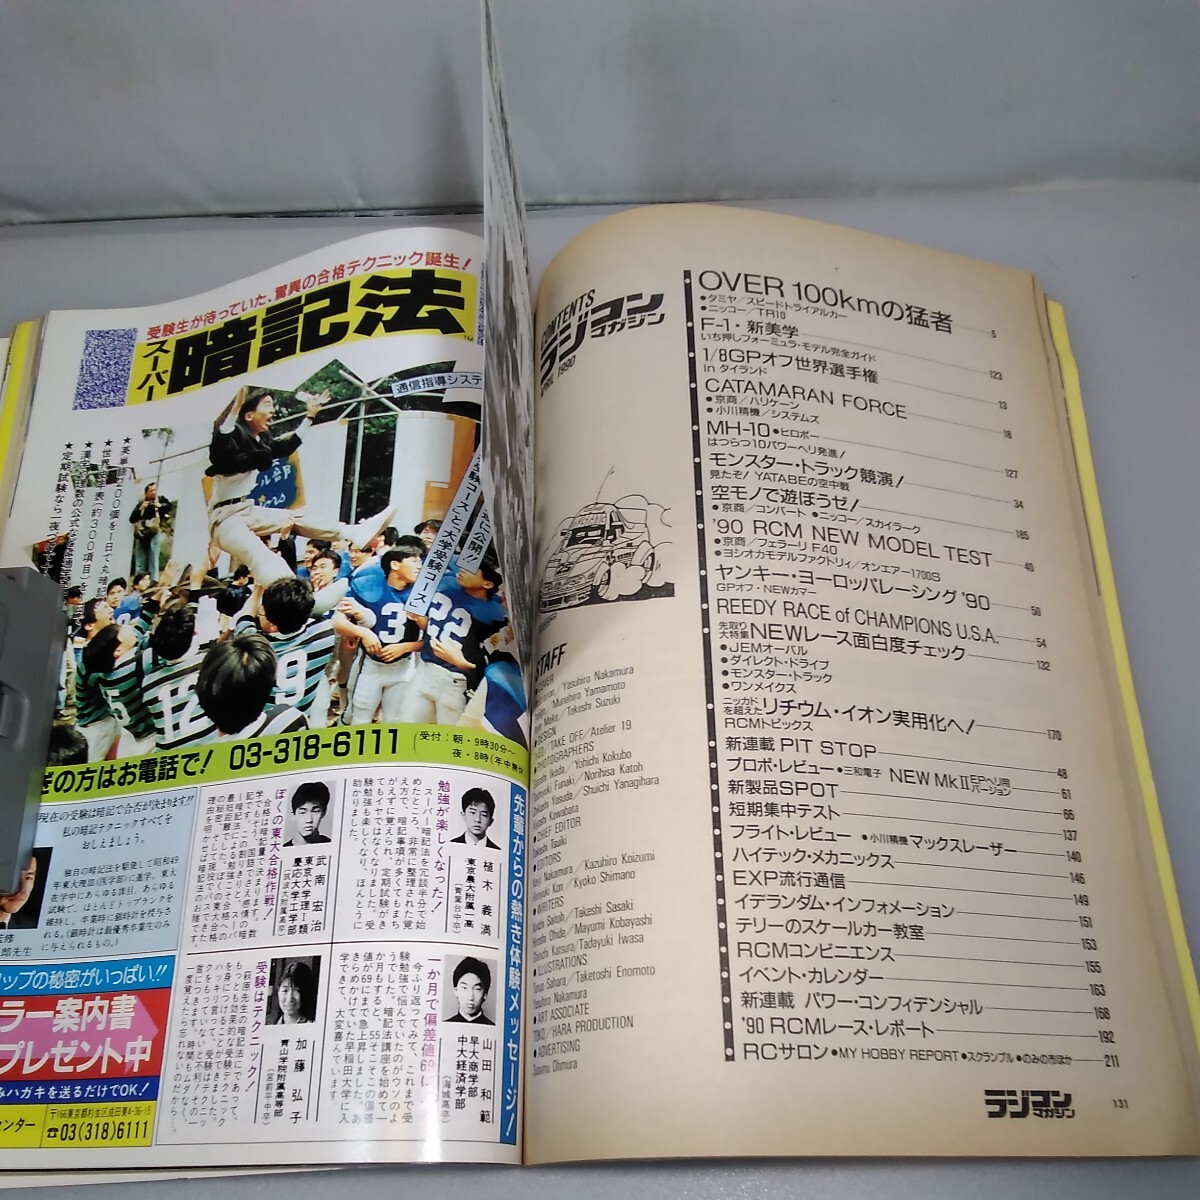 [ that time thing ] radio-controller magazine *1990 year 4 month number no. 13 volume no. 4 number * Heisei era 2 year 4 month issue *RCmagazine* Yaesu publish * free shipping * same day shipping * rare * the whole exhibiting 